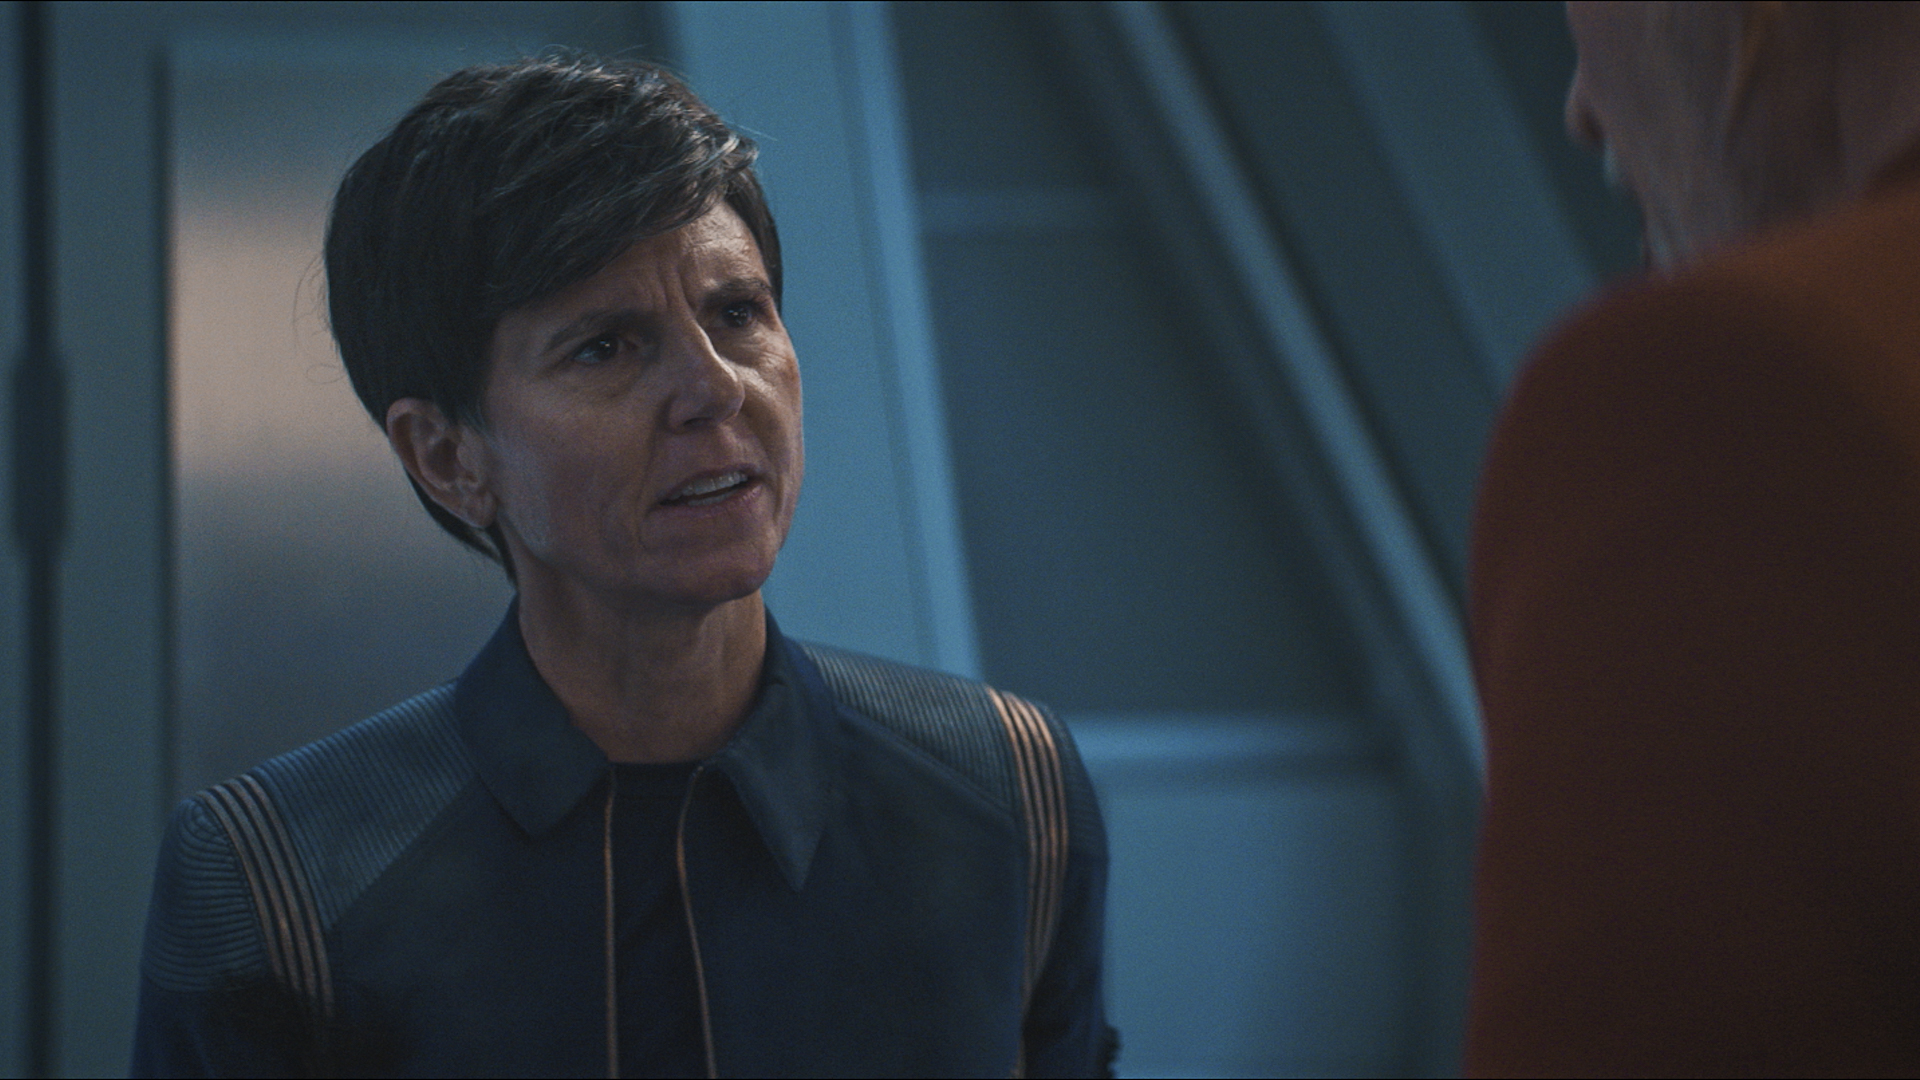 Tig Notaro, dressed in a blue uniform, engaged in a serious conversation on a spaceship set